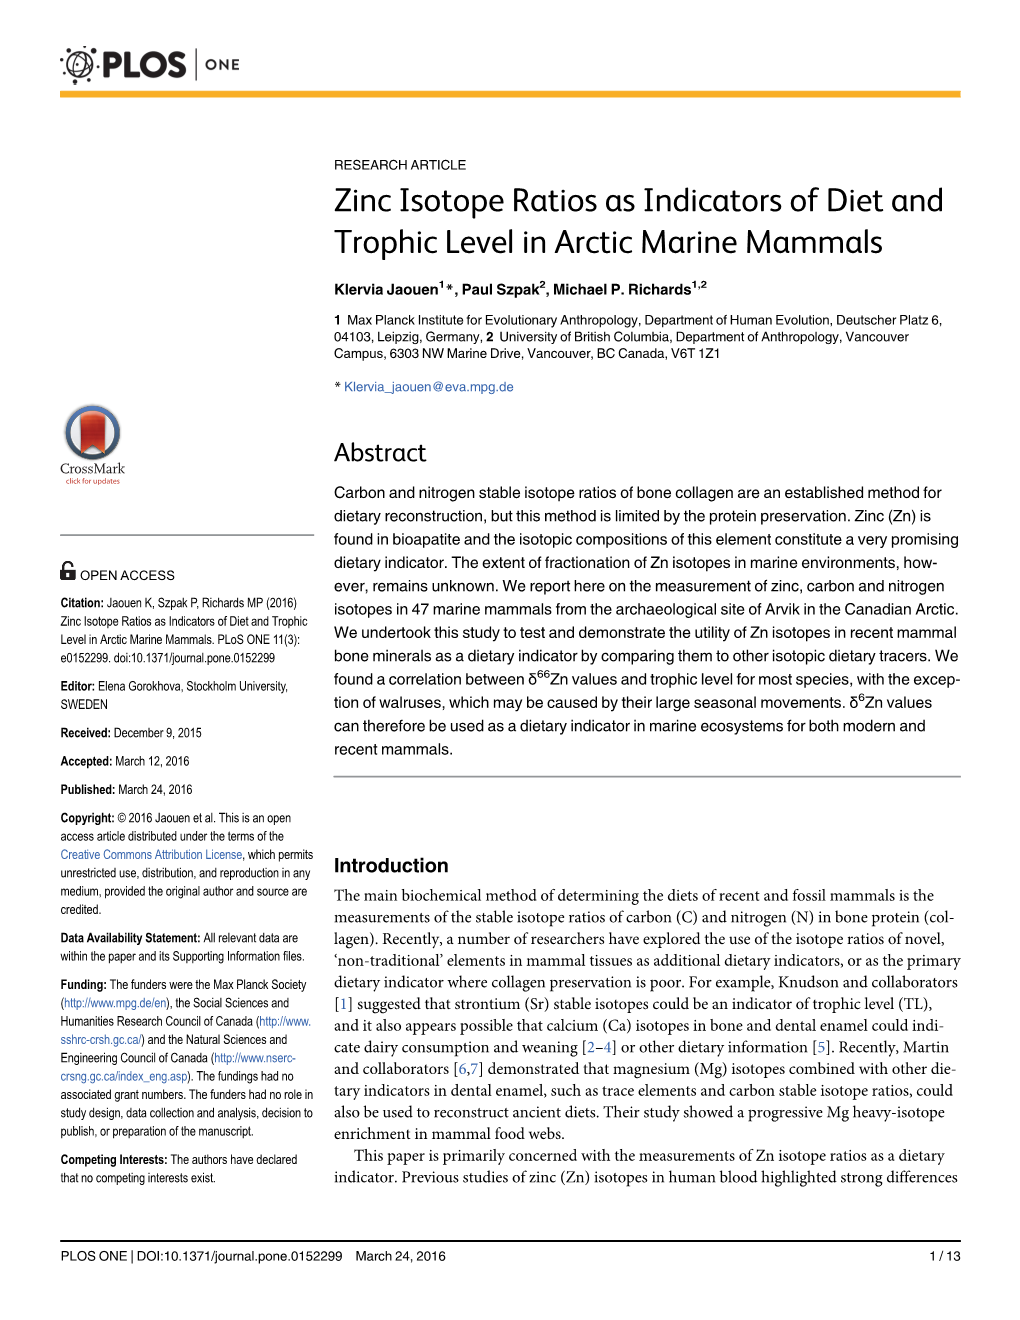 Zinc Isotope Ratios As Indicators of Diet and Trophic Level in Arctic Marine Mammals